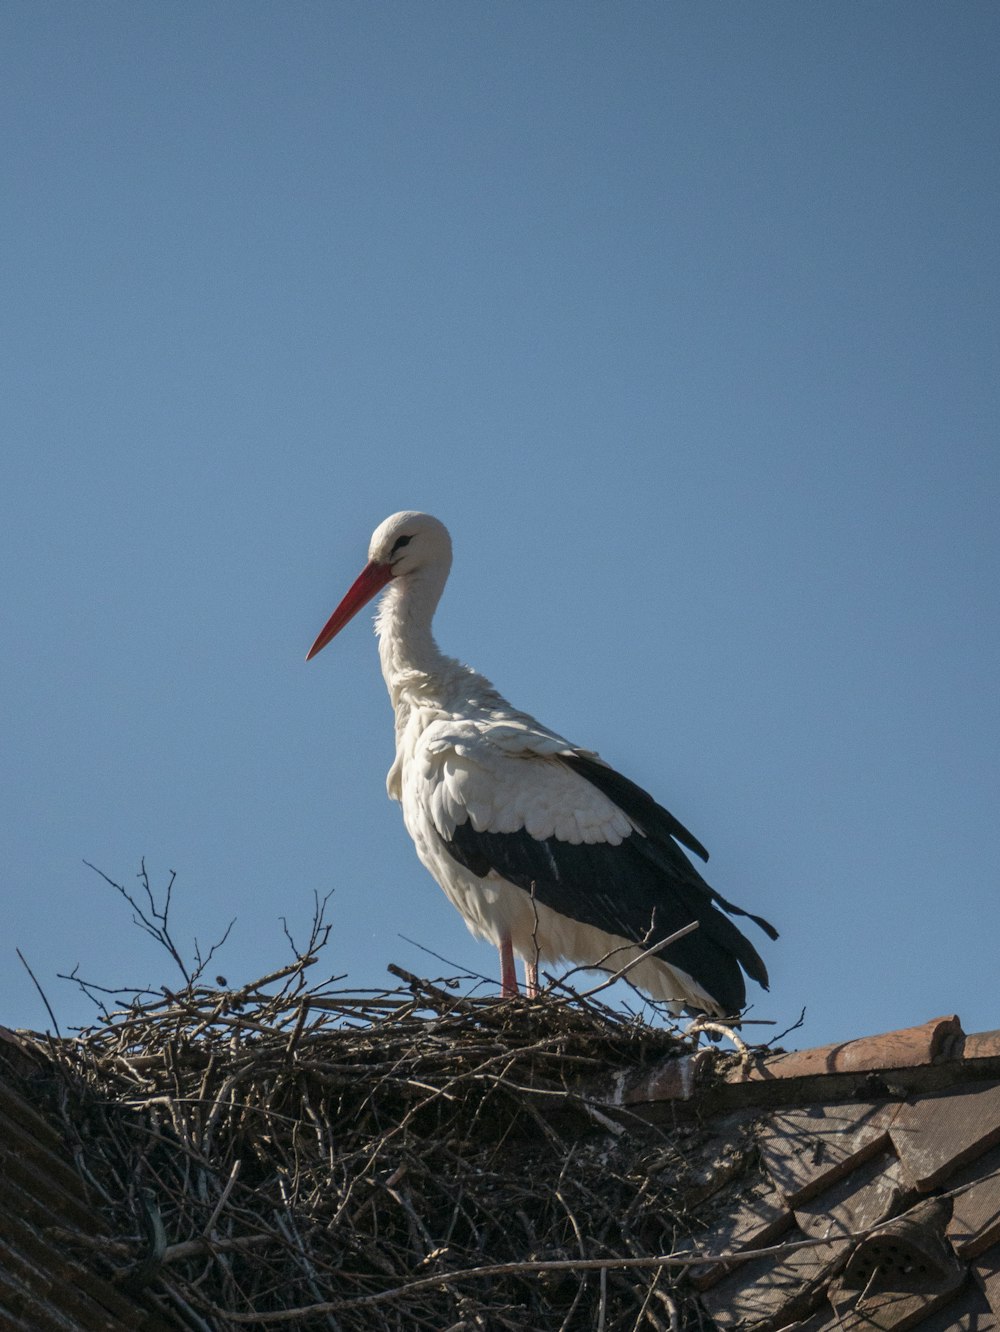 a stork is standing on top of a nest